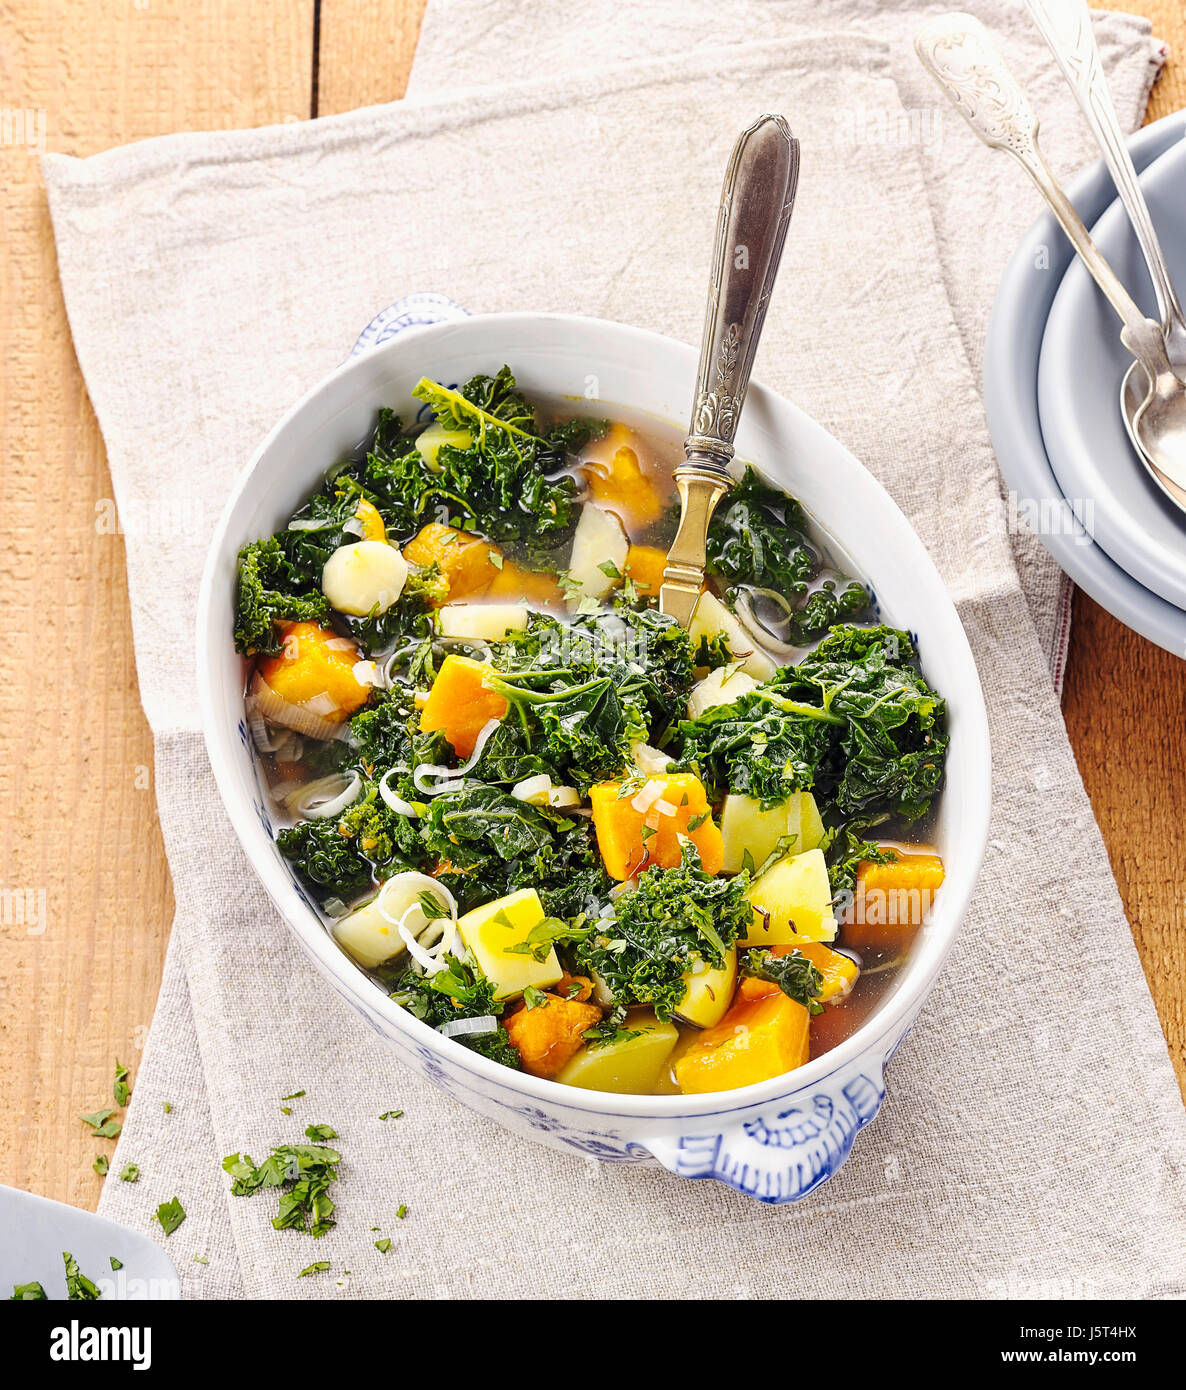 Winterly stew with kale Stock Photo